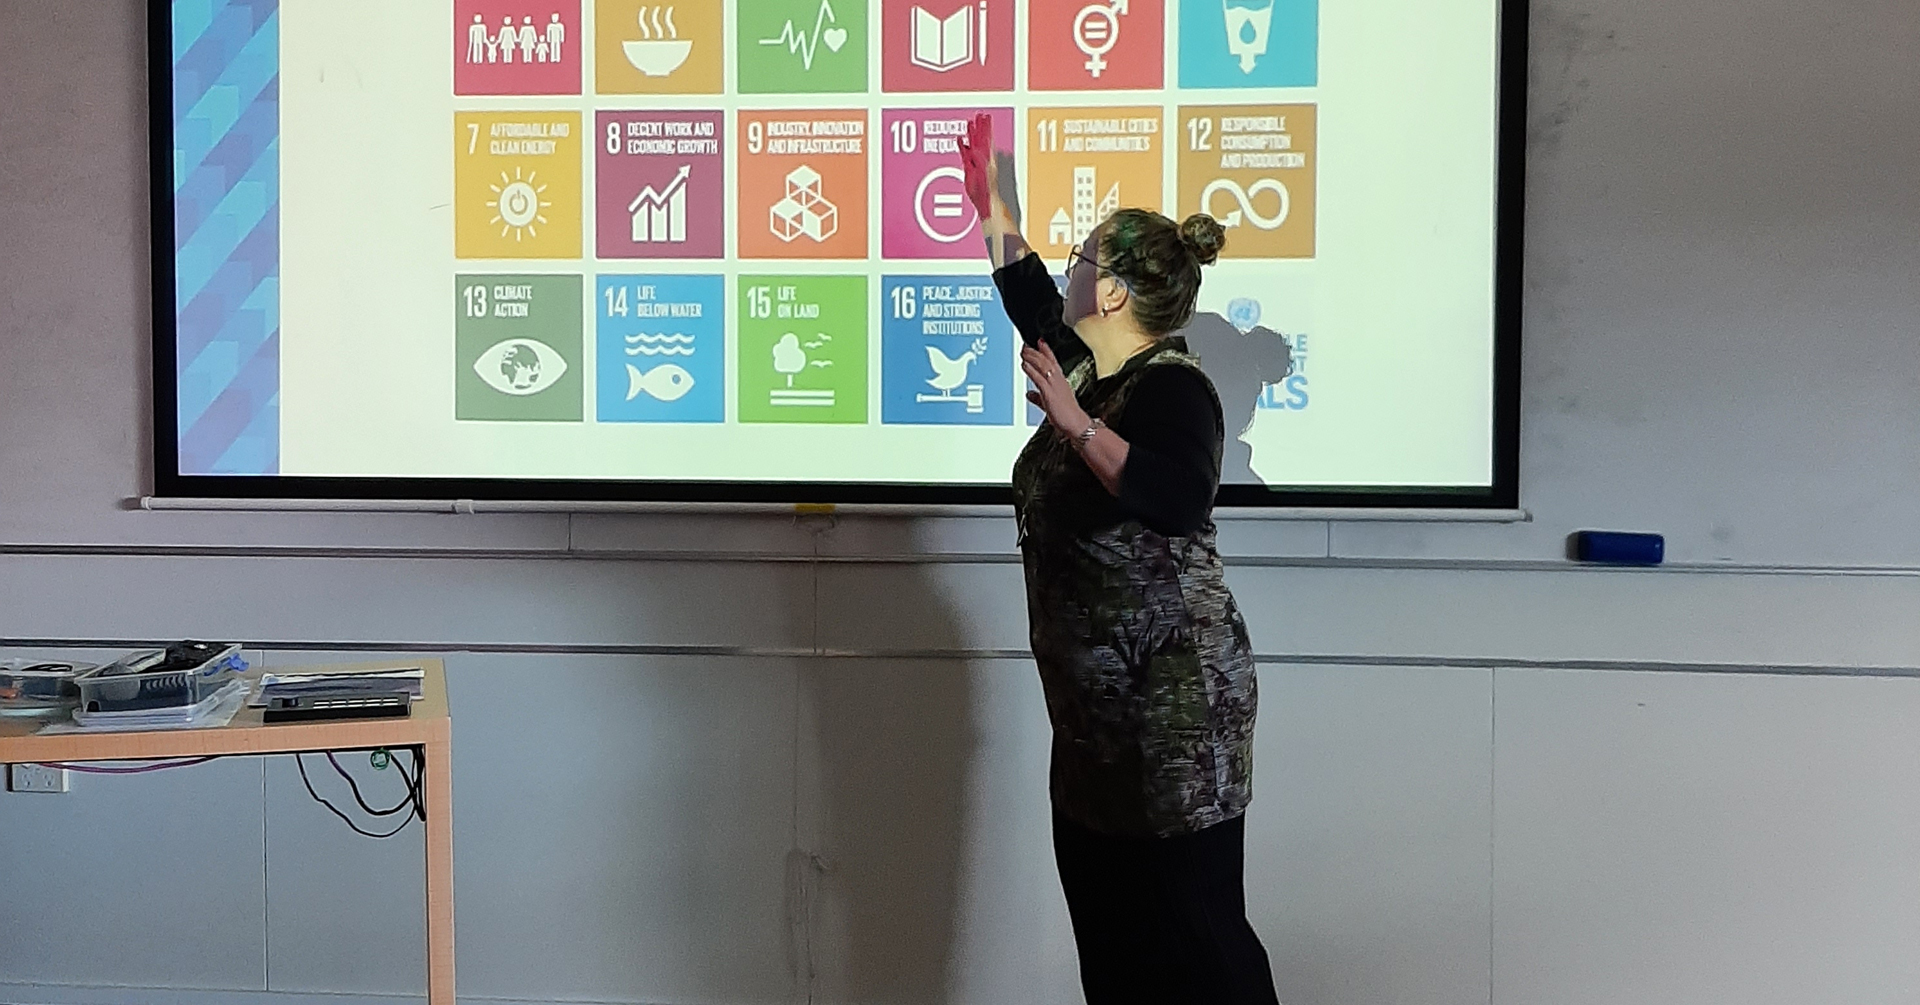 Image of Kim Daly pointing at the SDGs on a projected image.